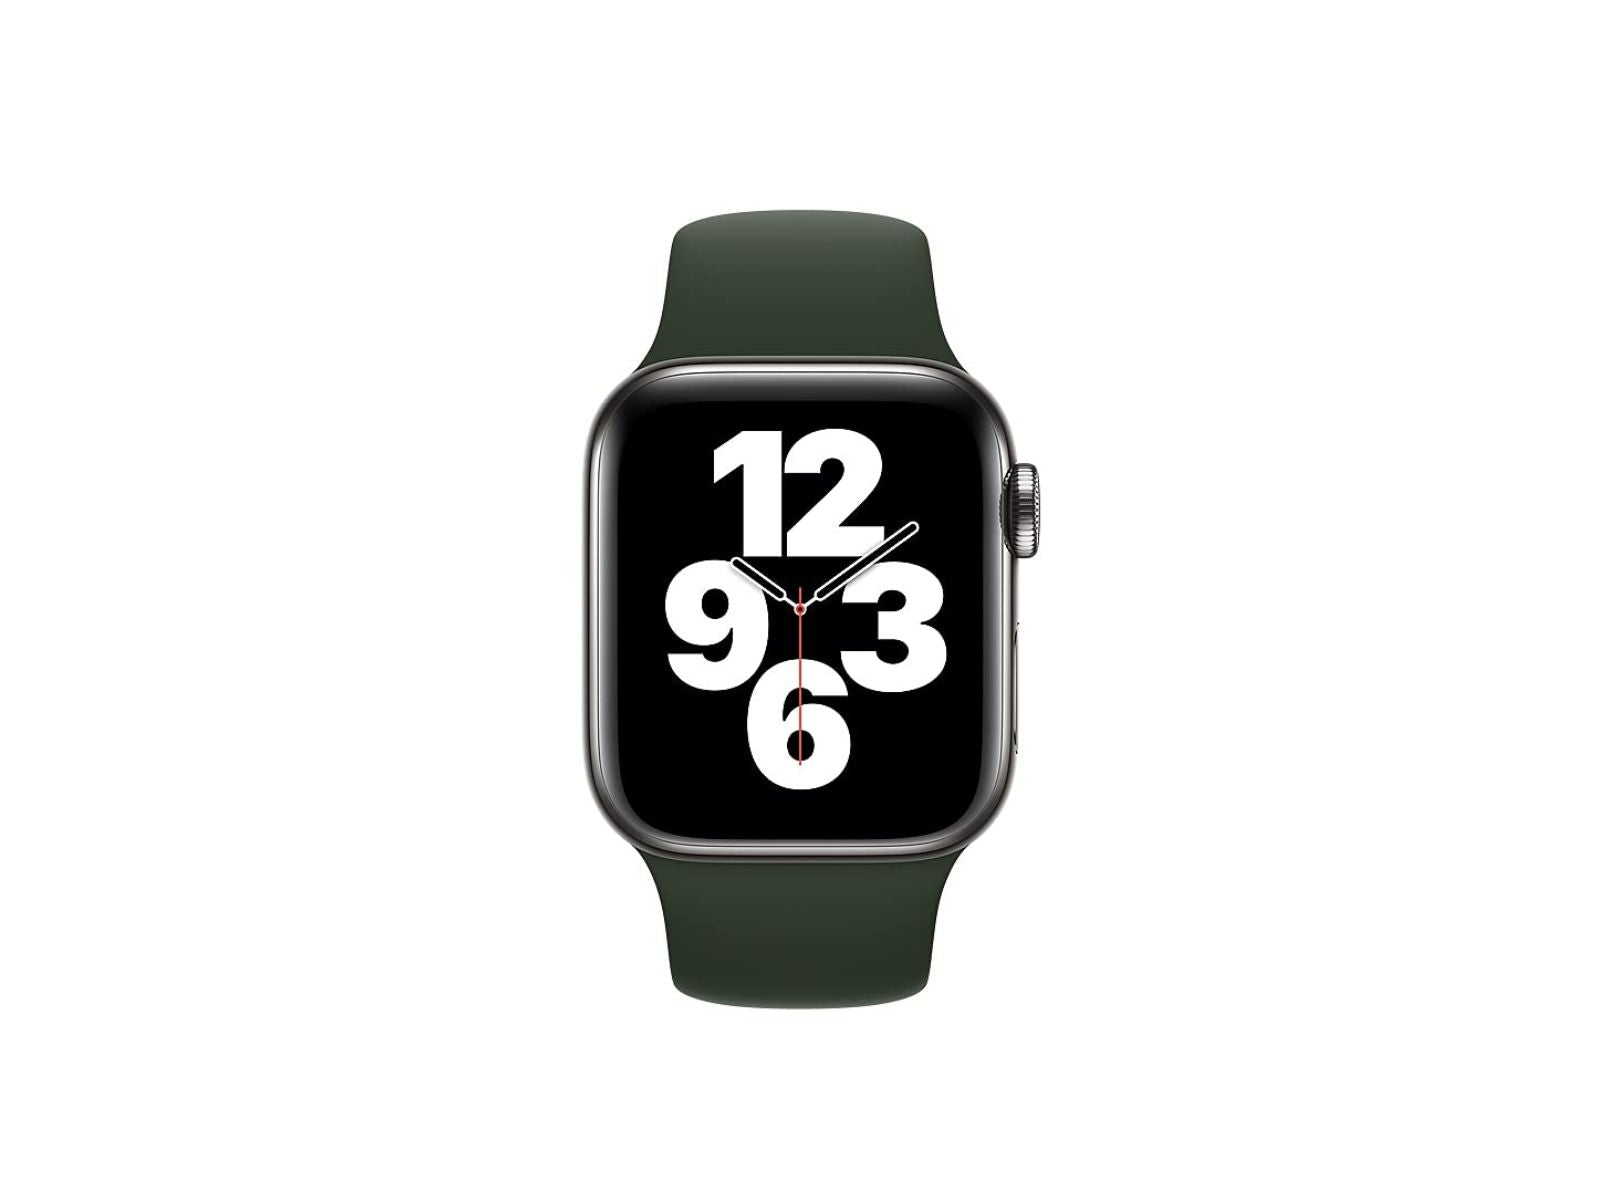 Image shows a front view of the Green Apple Watch Strap on an apple watch